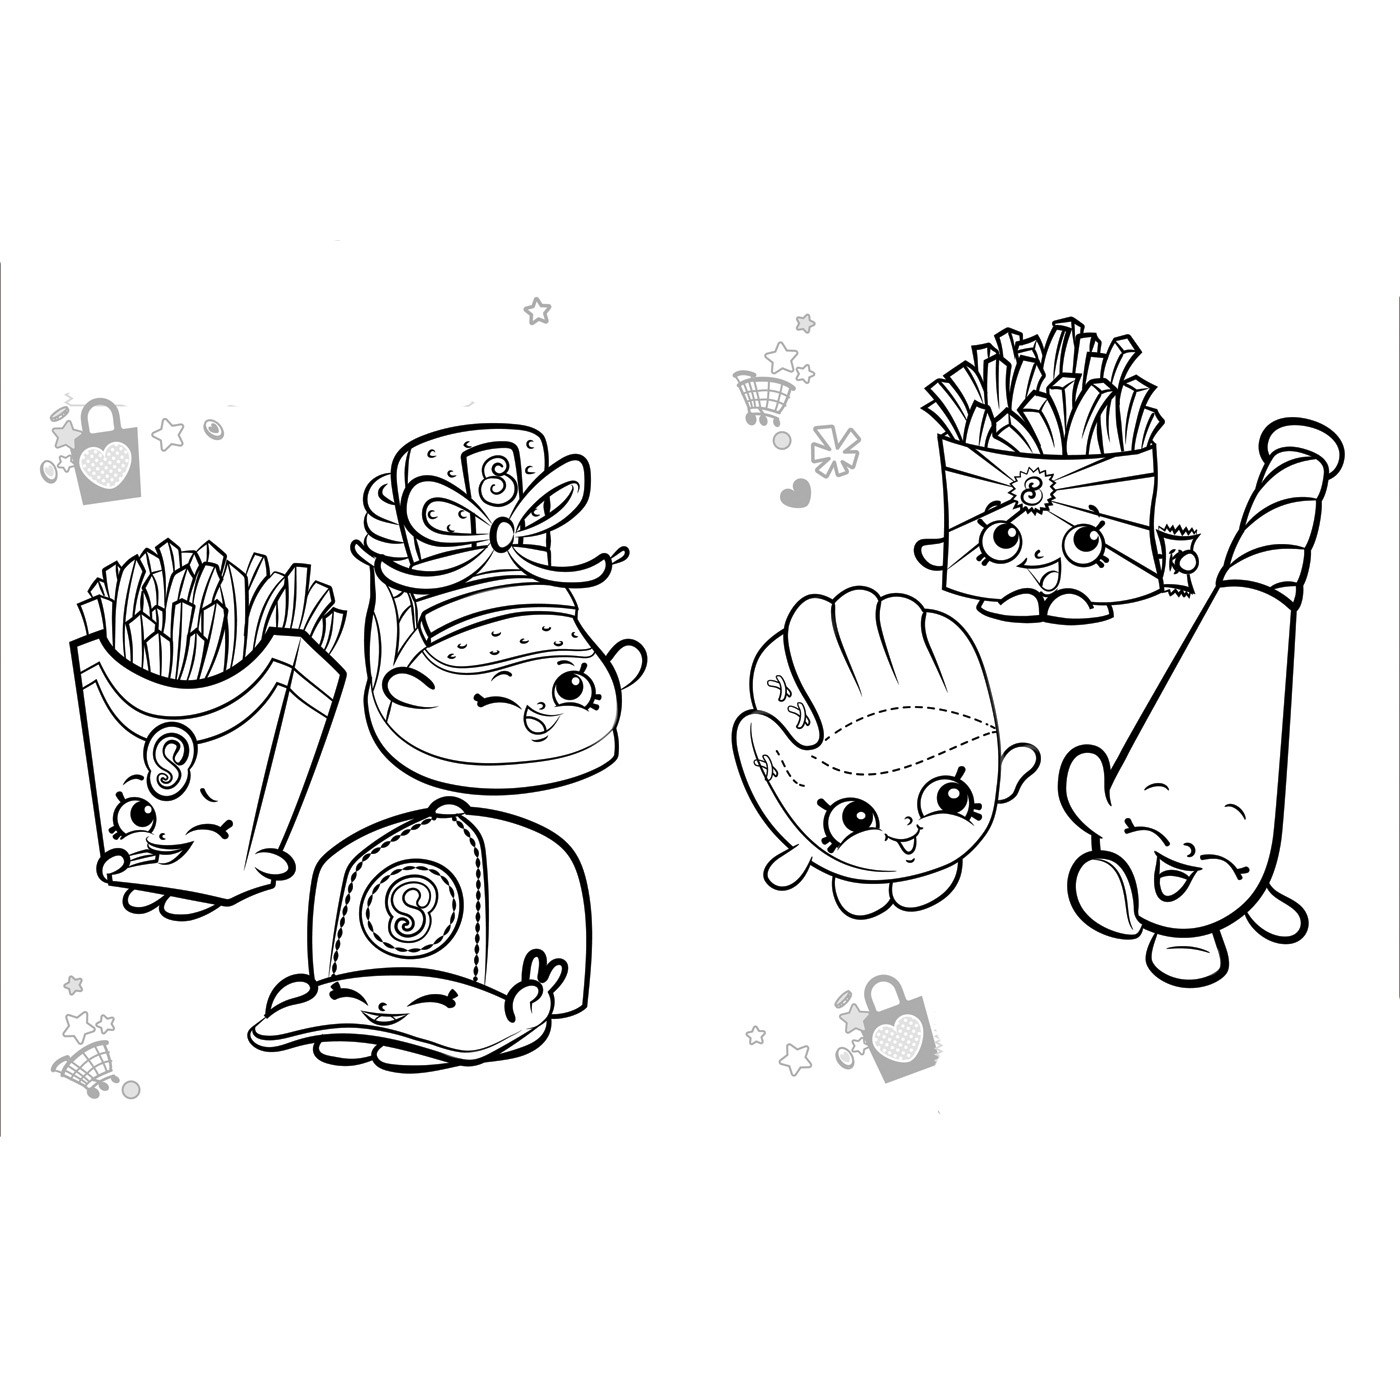 Shopkins coloring page